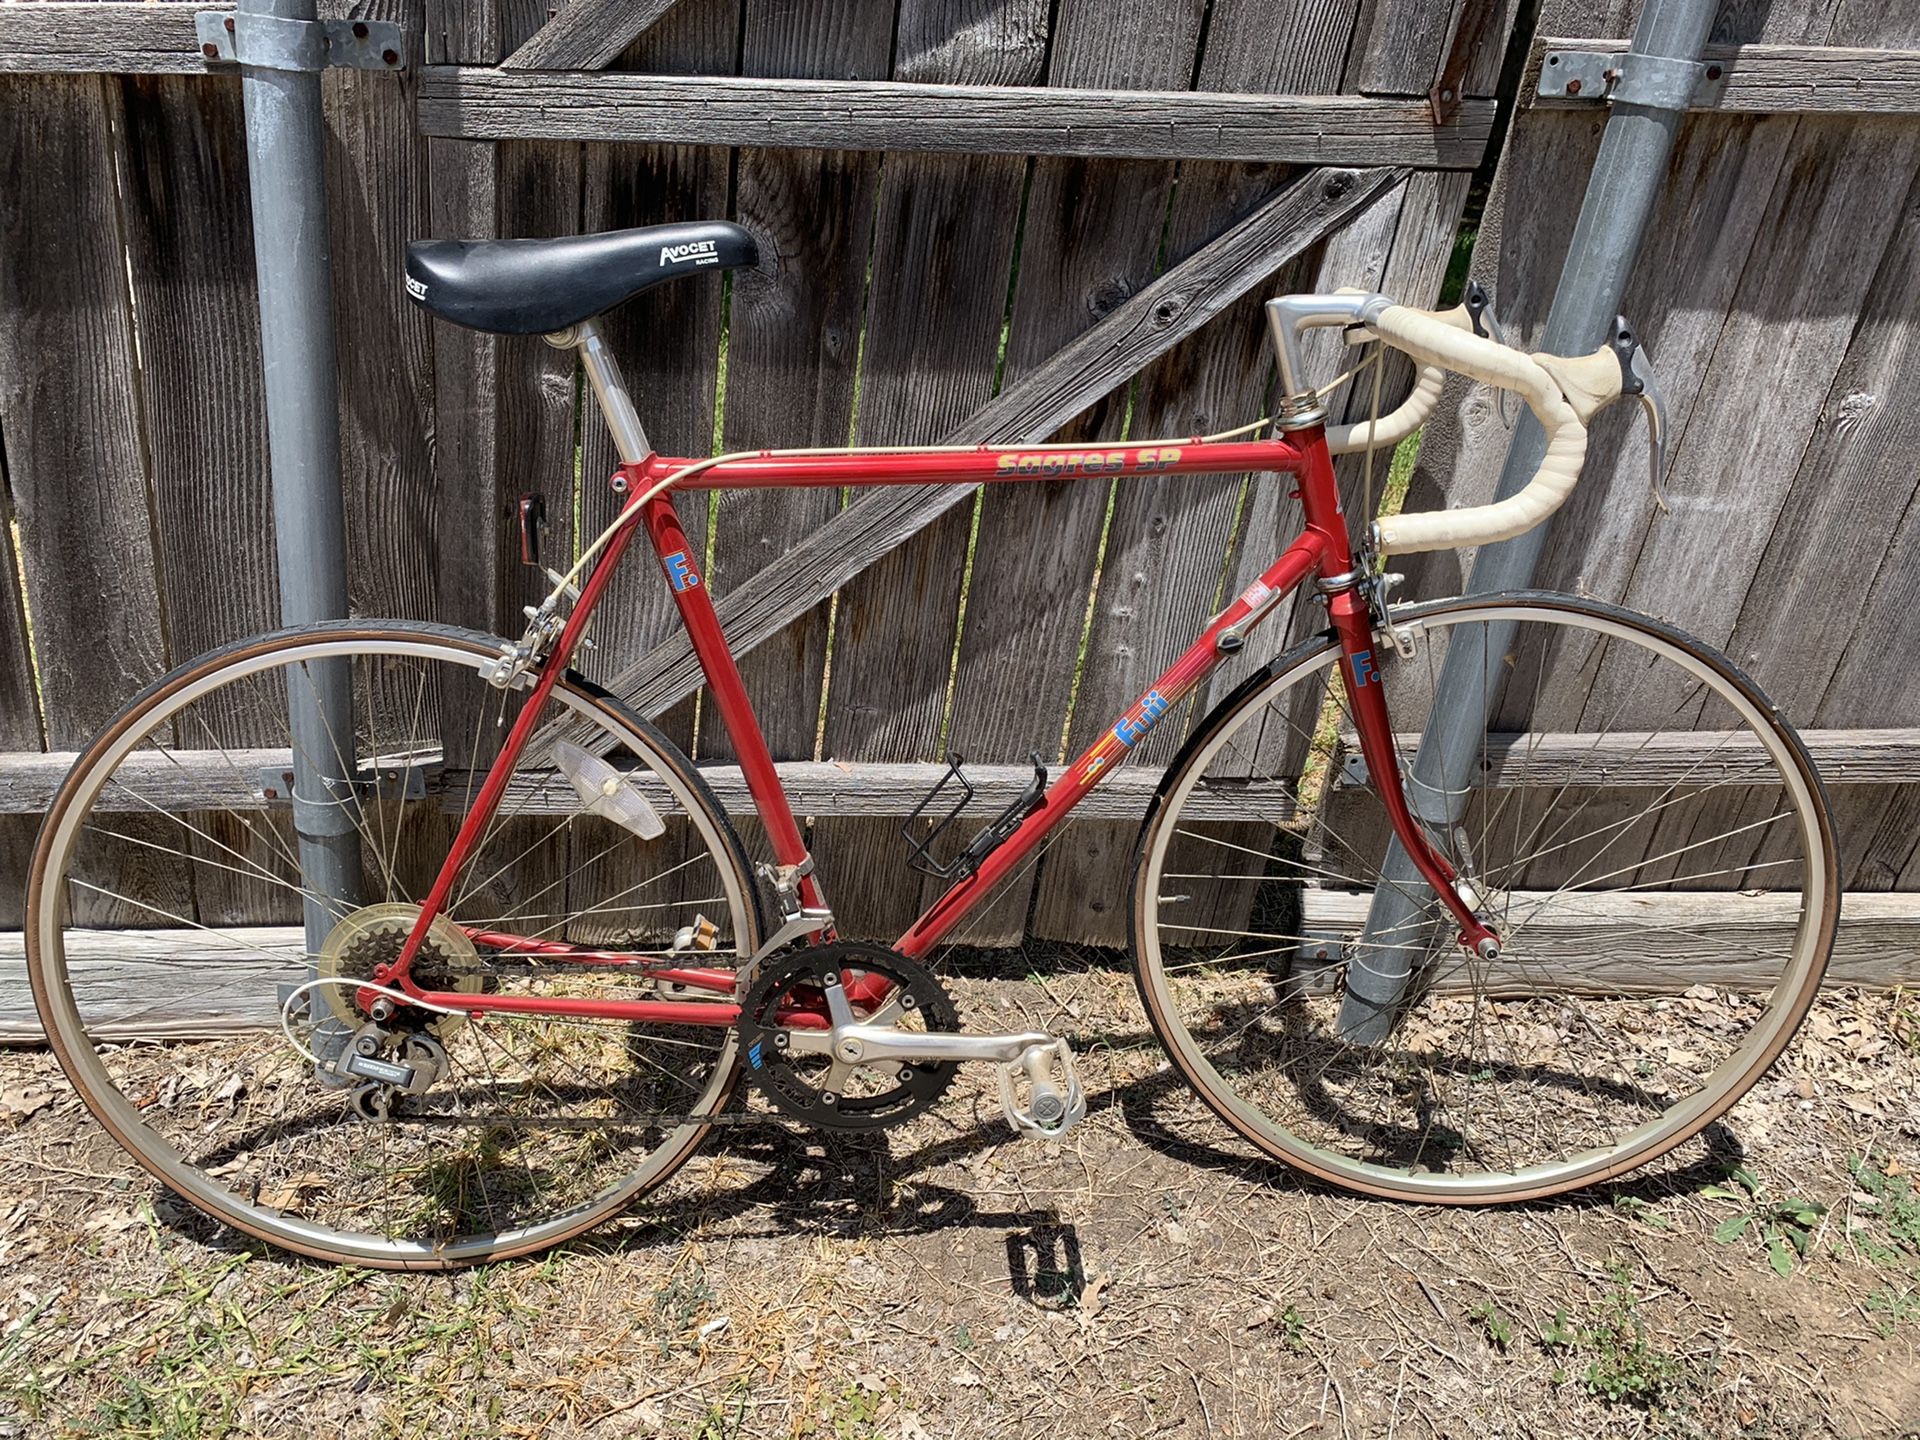 VINTAGE 1988 FUJI SAGRES SP Road Bike TANGE for sale! Need to sell today!